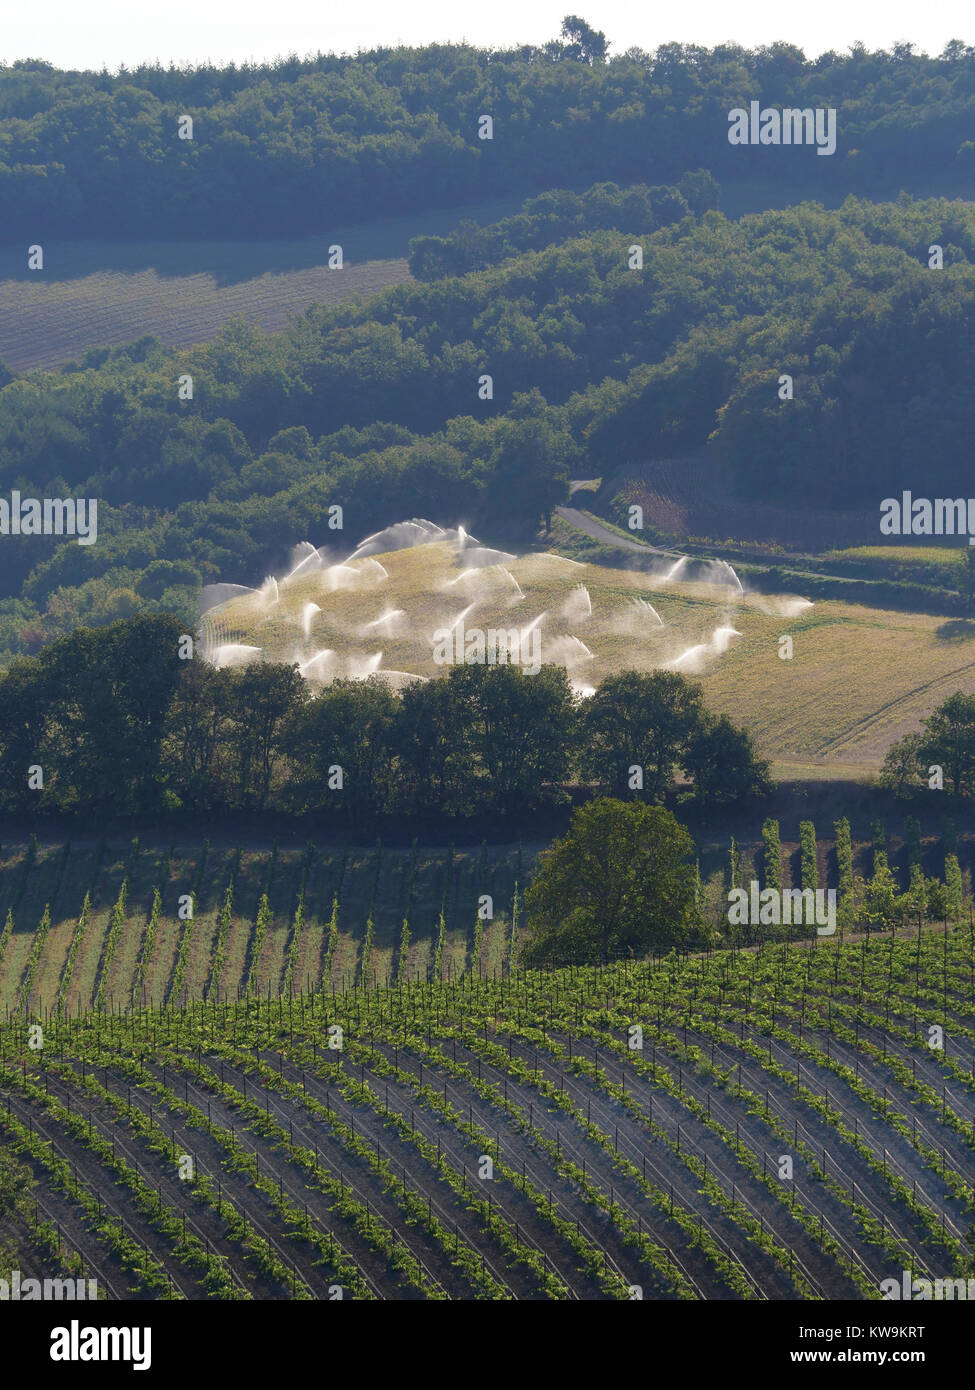 Farm field crops  being sprinkler watered in the south of France heat haze showing vines in the foreground Stock Photo